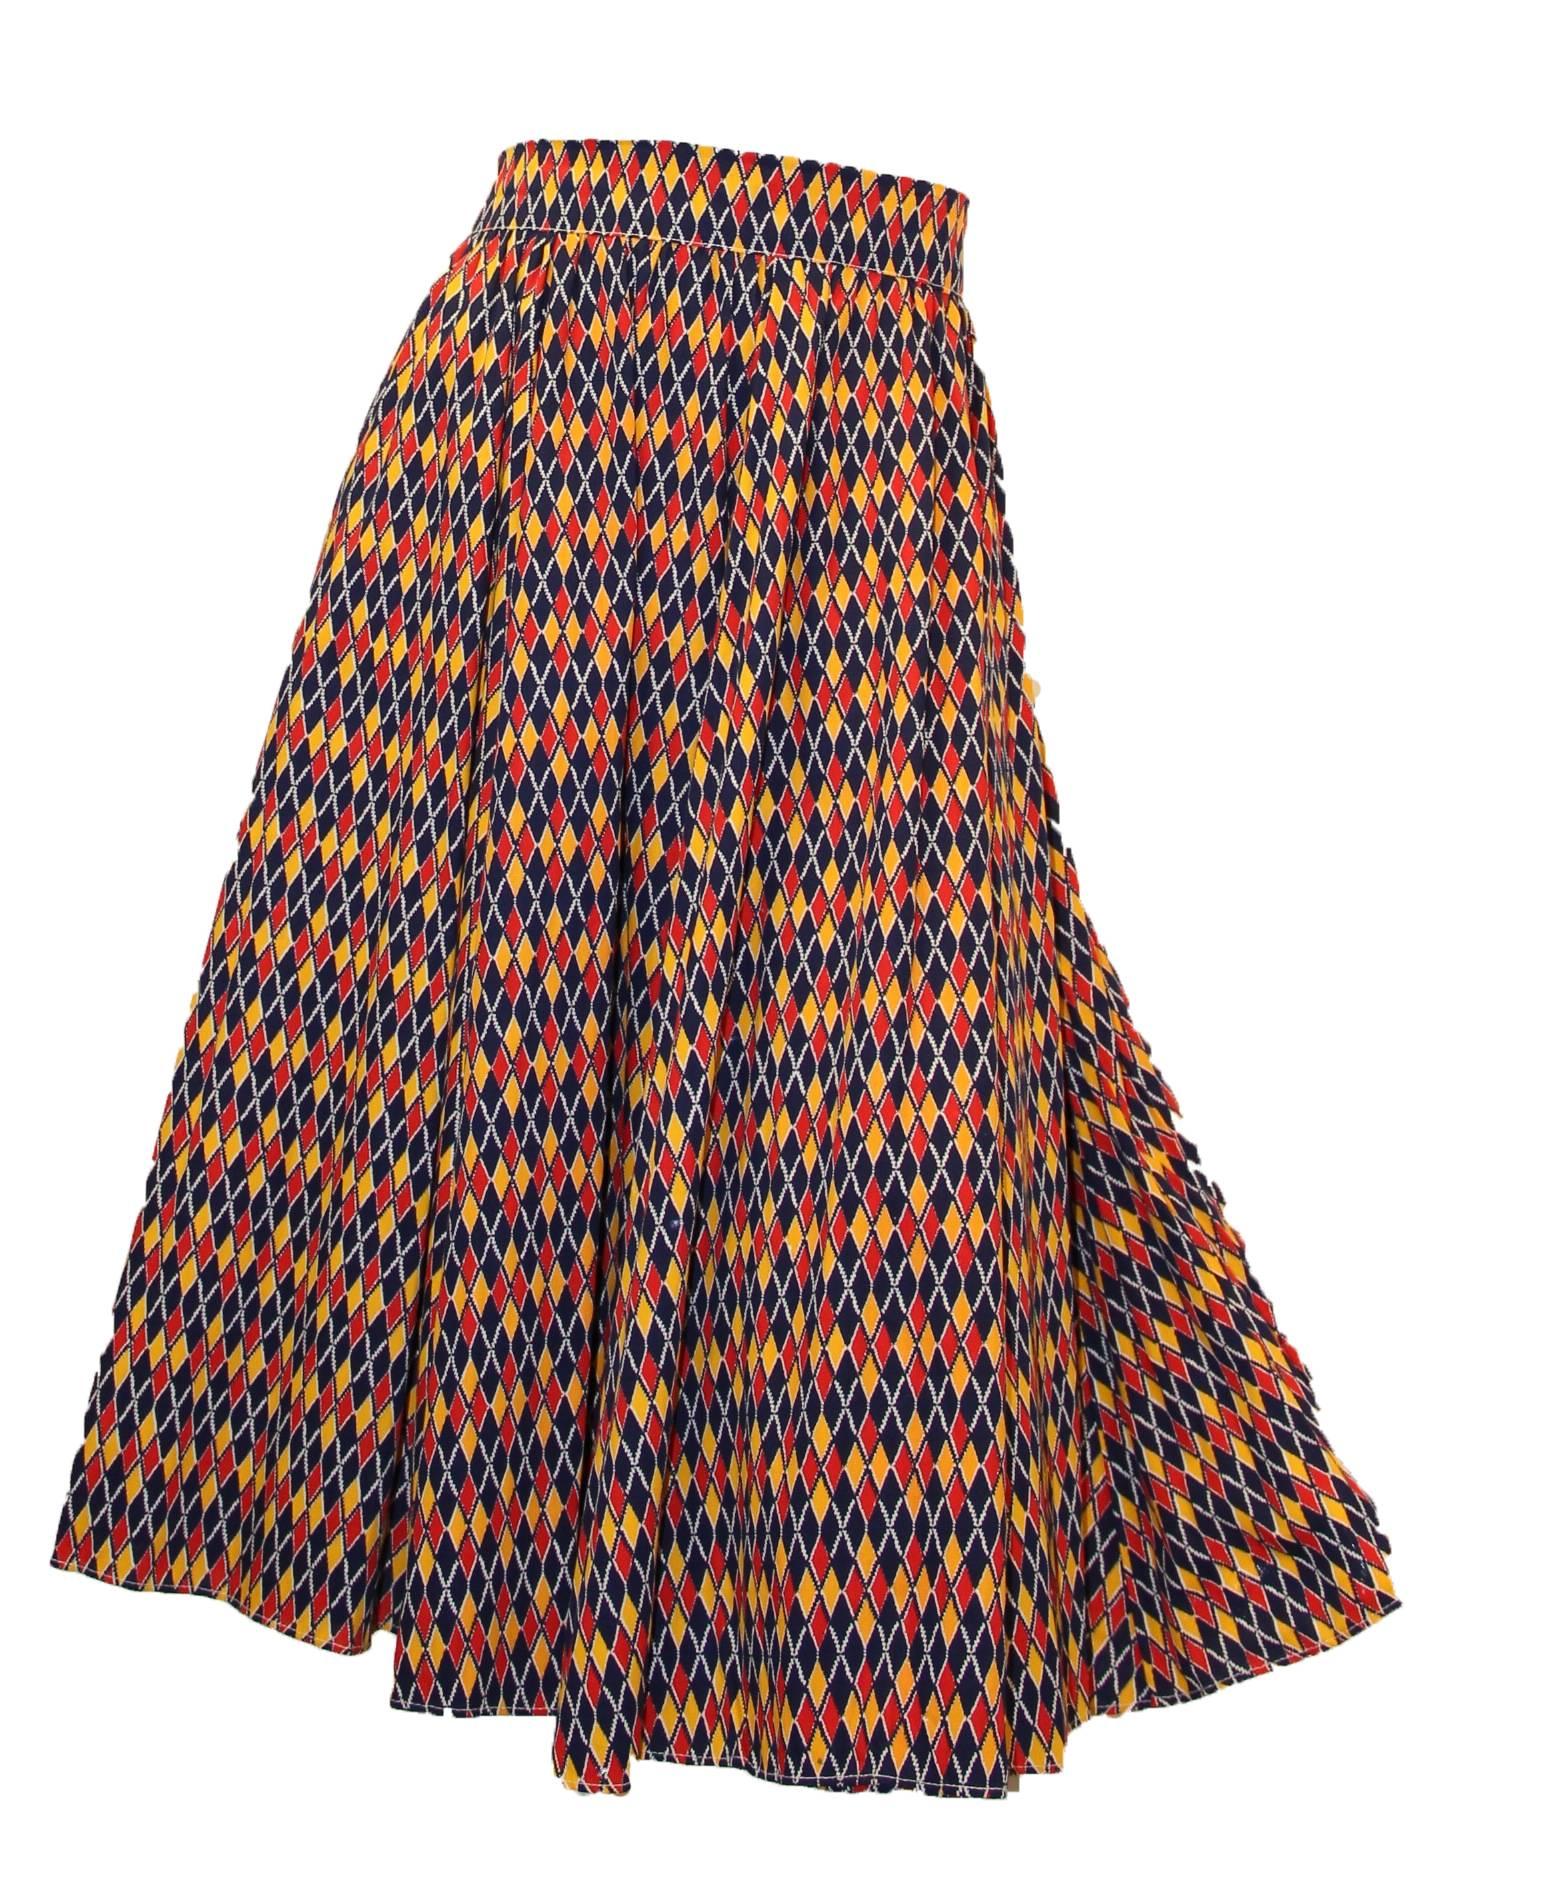 1950s circle skirt. Argyle print in primary colors. Center back zipper with double button closure. 

Measurements:
Waist: 32"
Circumference: 224:
Length: 26.5"